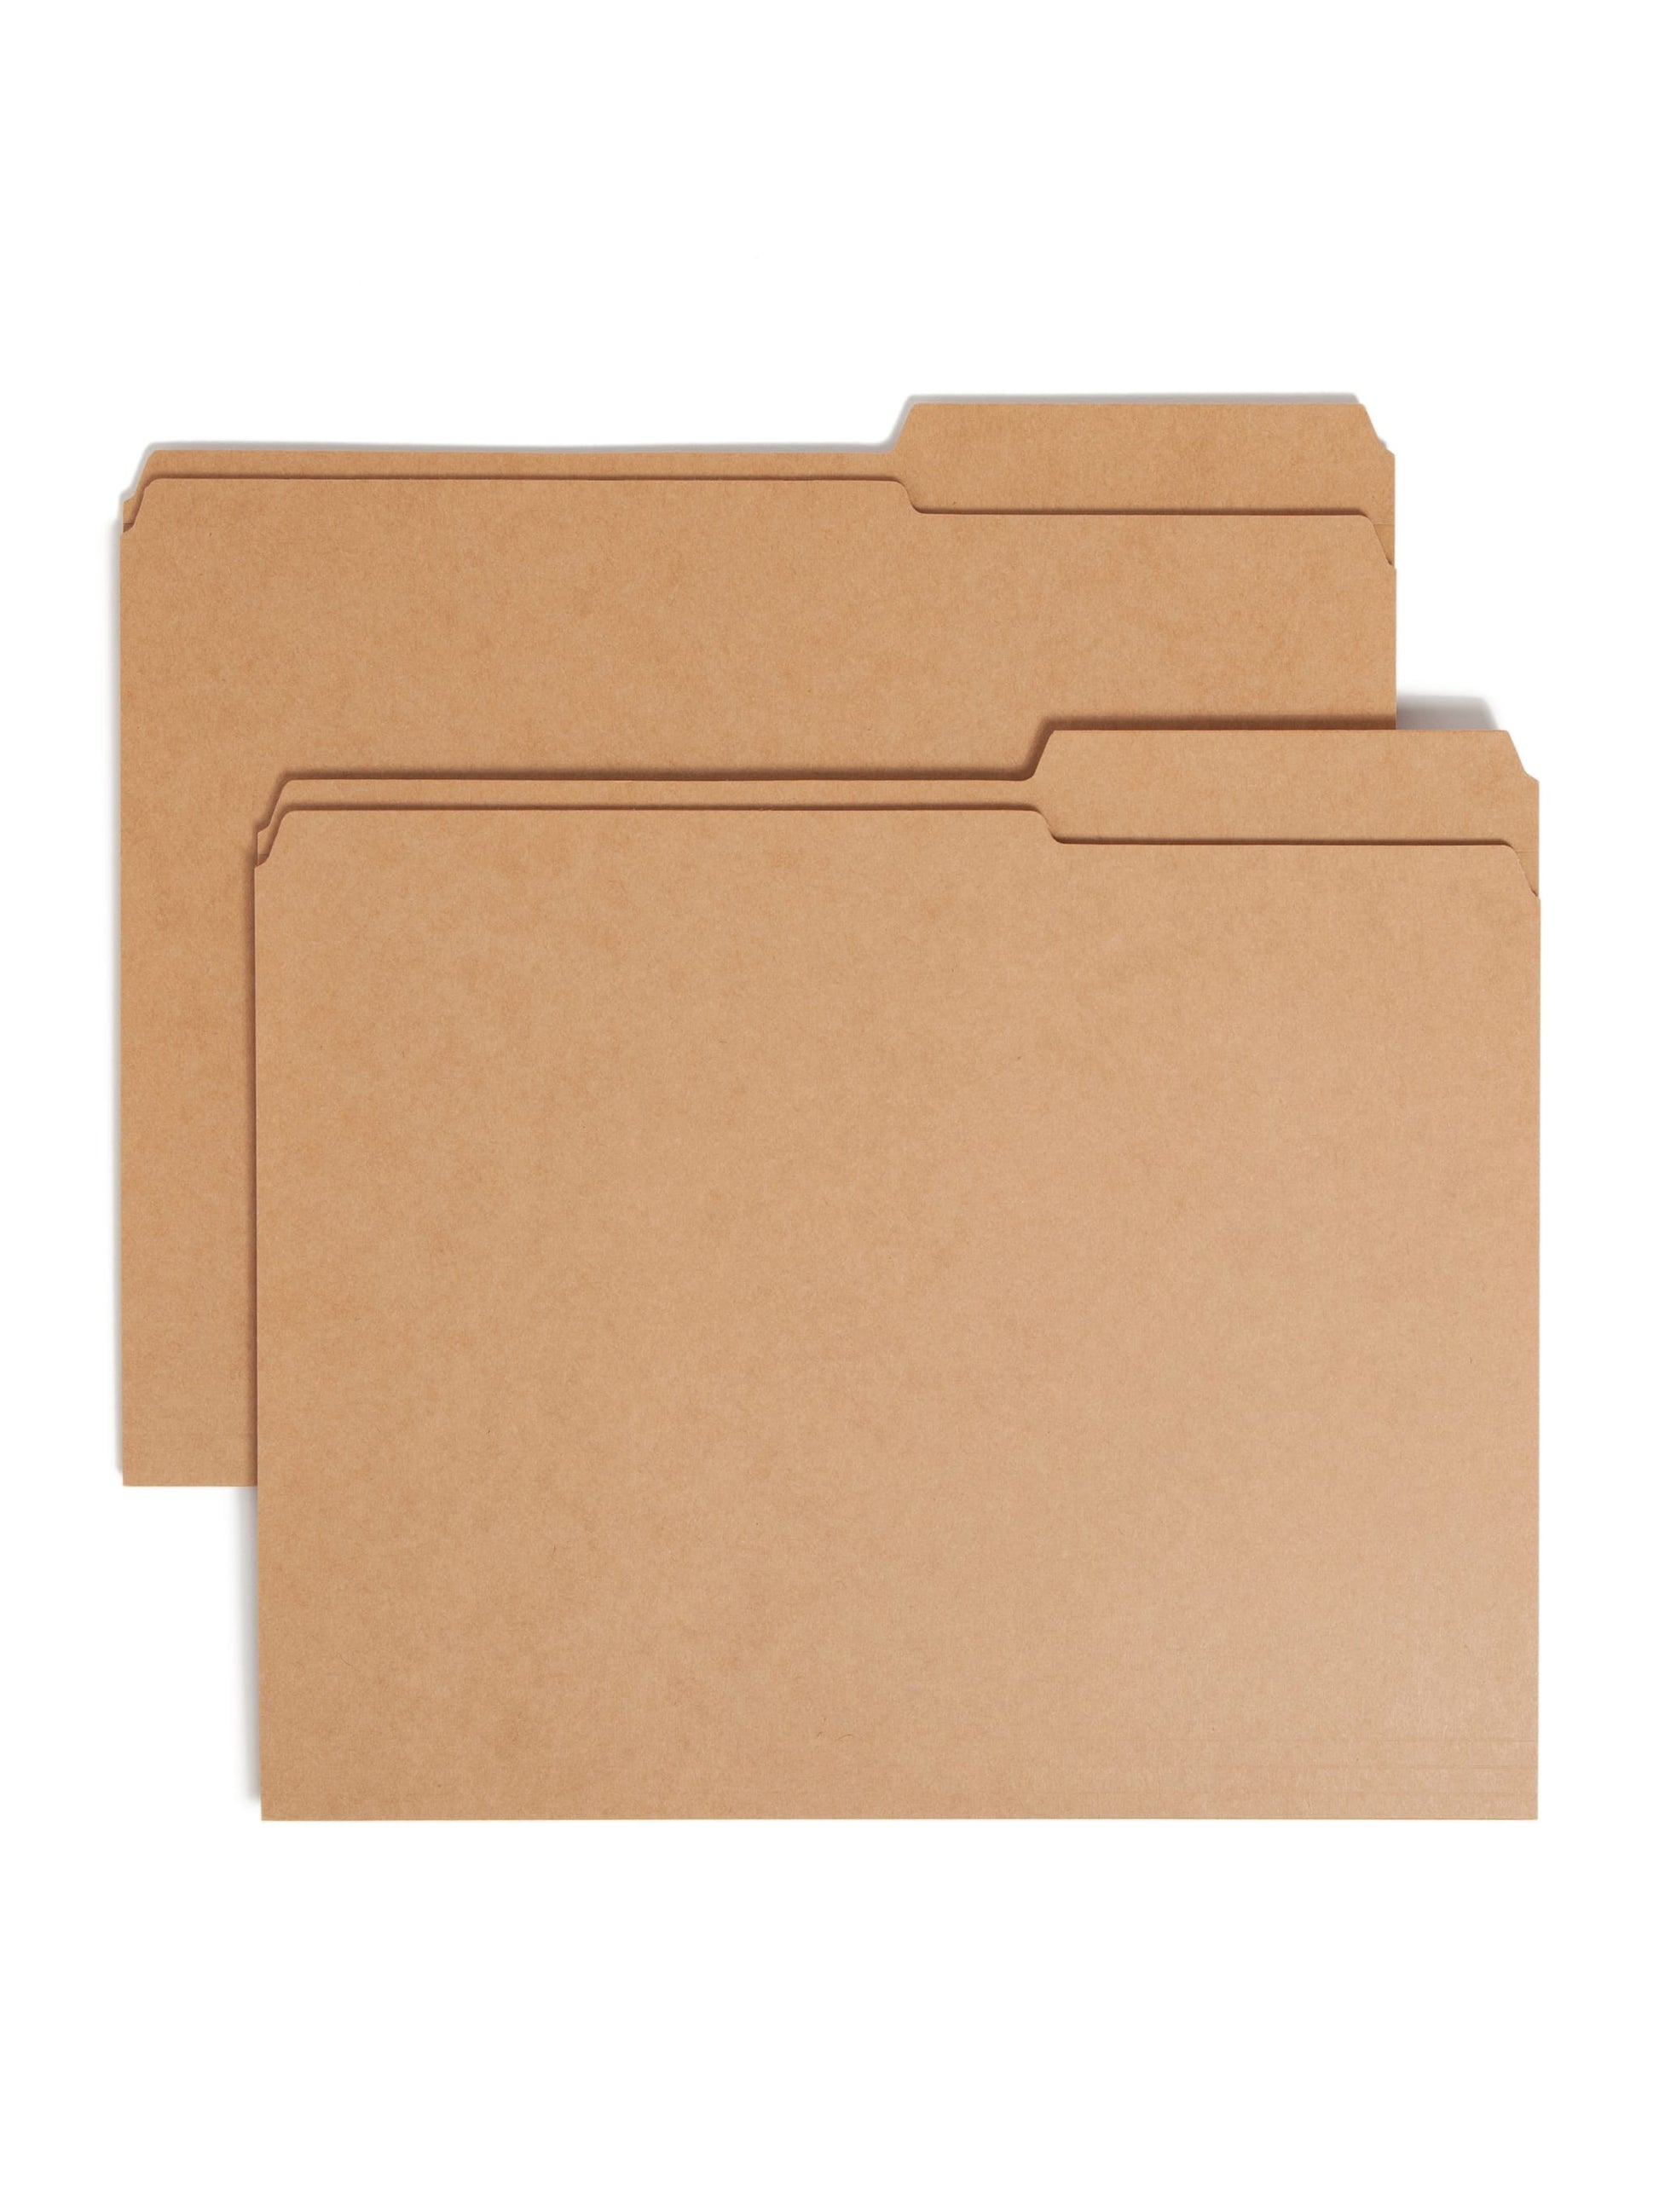 Reinforced Tab File Folders, 2/5-Cut Guide Height Right Tab, Kraft Color, Letter Size, Set of 100, 086486107860